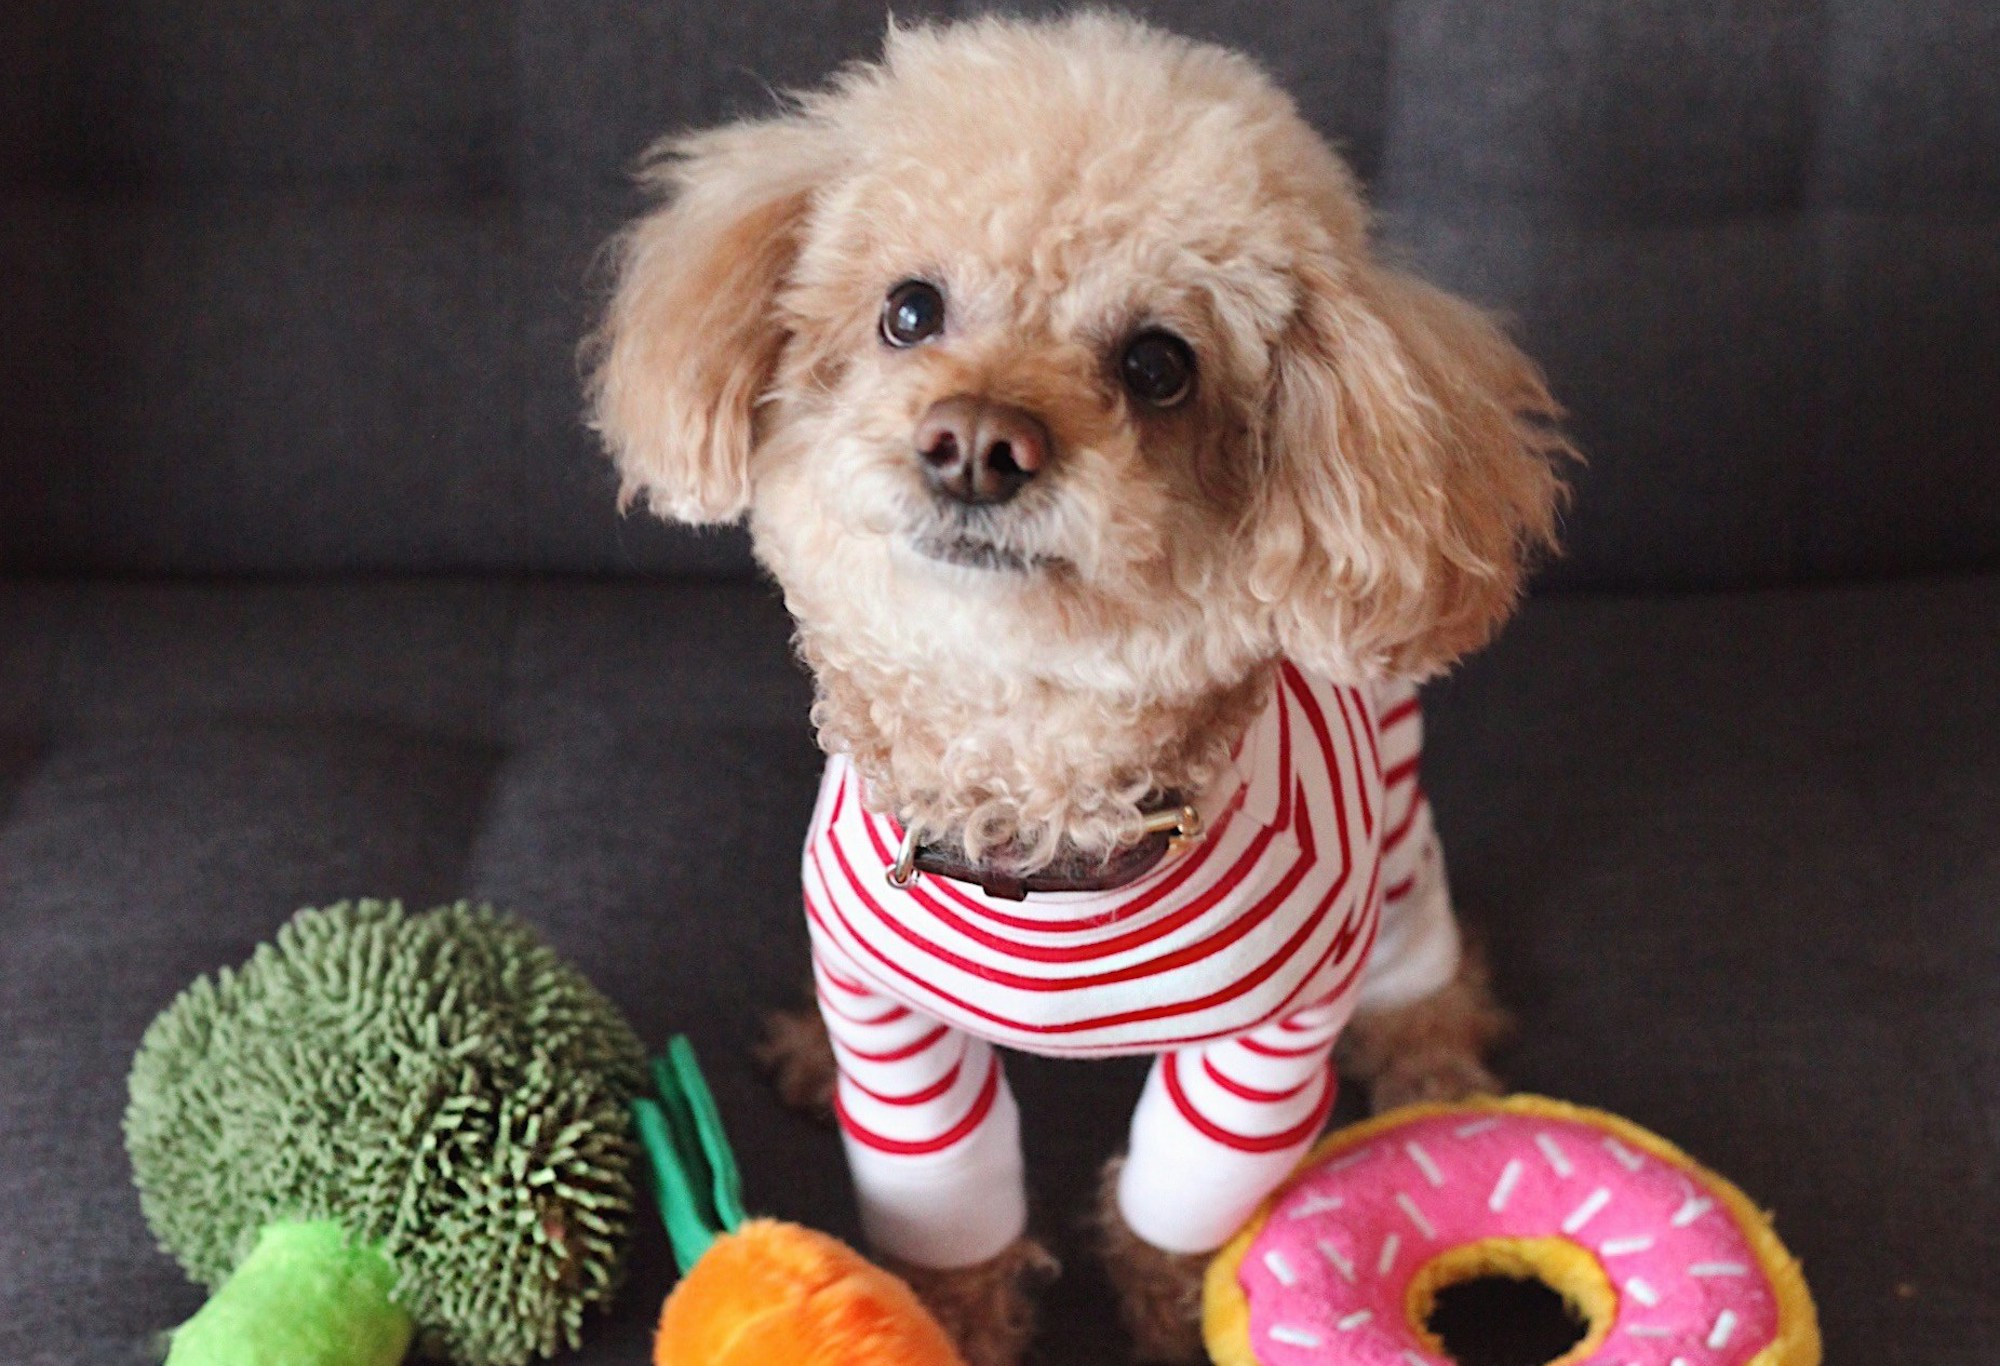 A miniature poodle in a striped red and white sweater sits on a couch in front of food-shaped dog toys